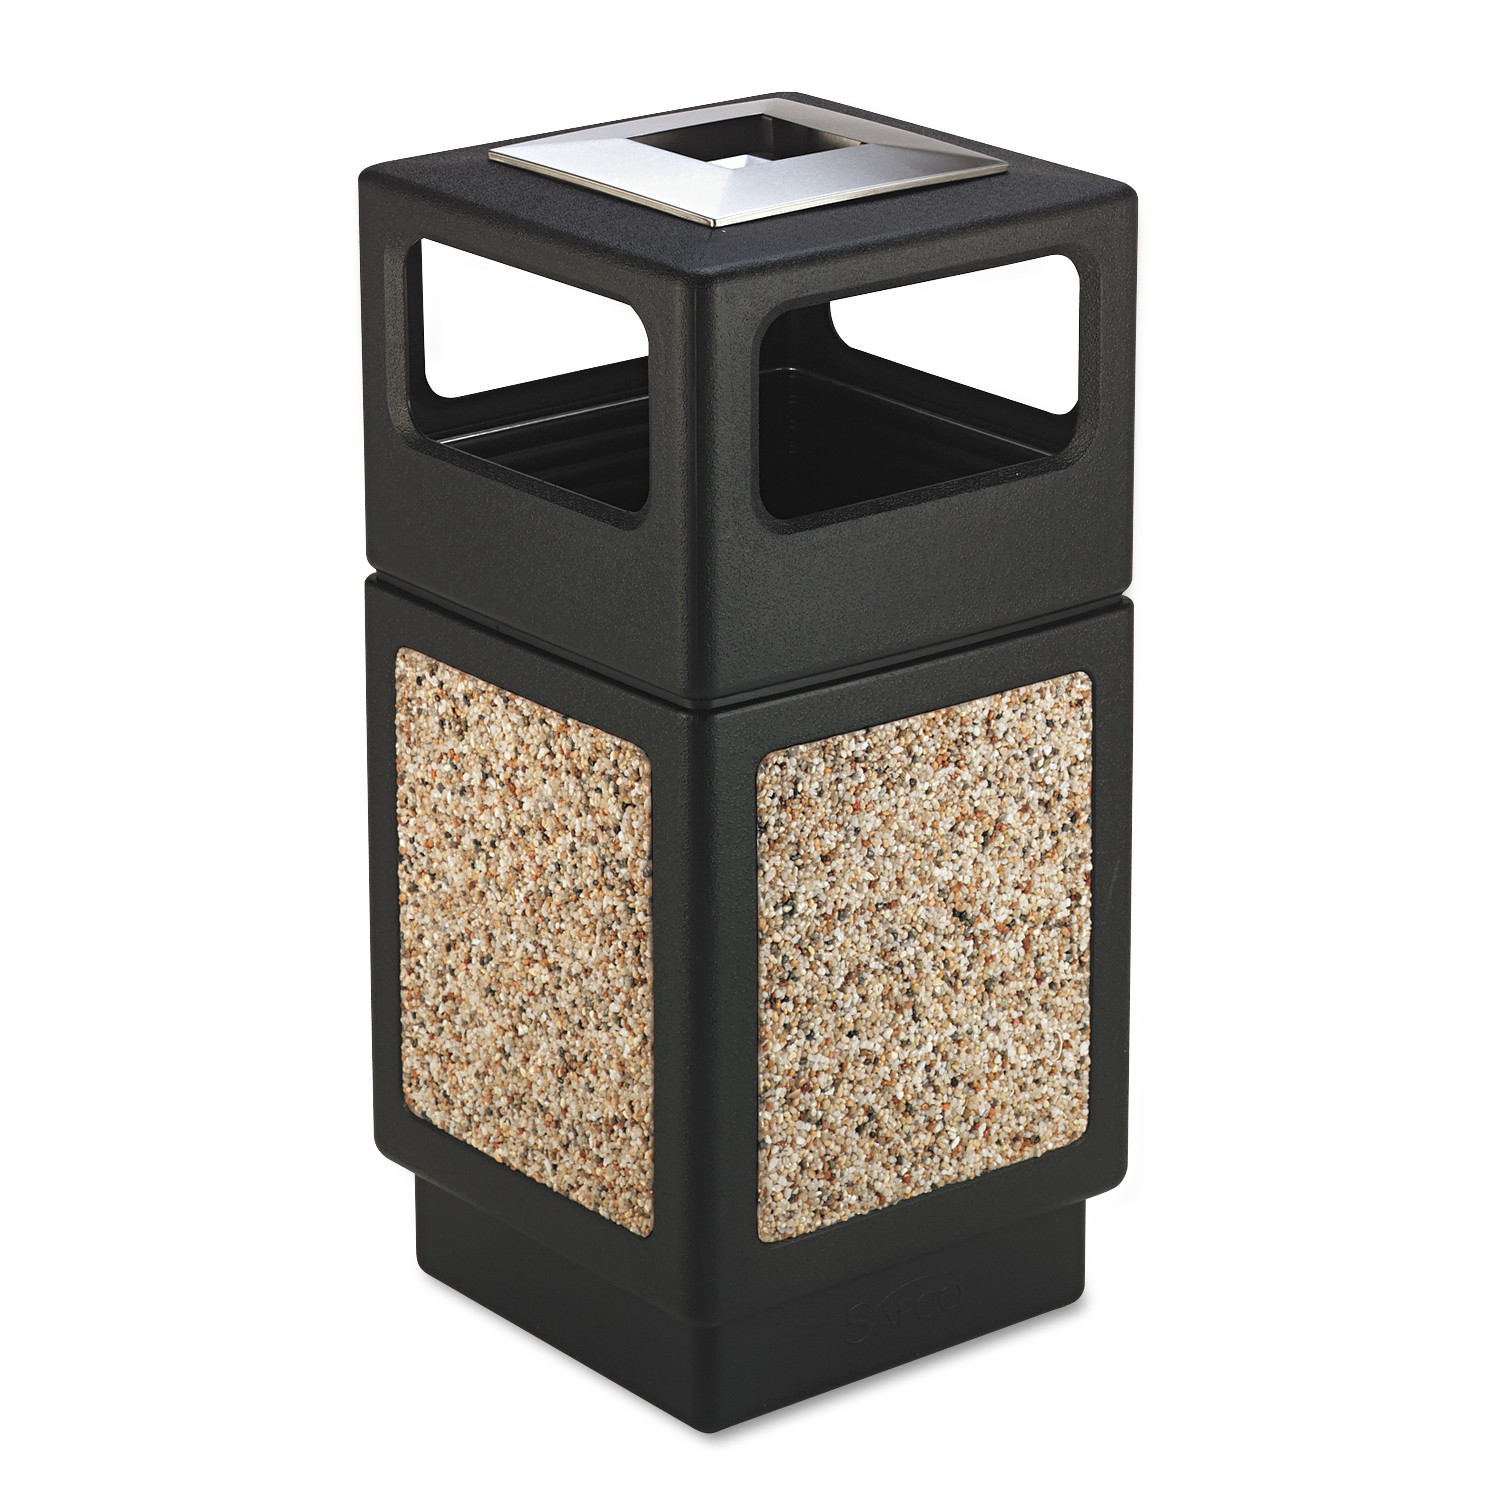 Safco Plastic/Stone Aggregate Receptacles - 38 gal Capacity - Square - 39.3" Height x 18.3" Width x 18.3" Depth - Polyethylene